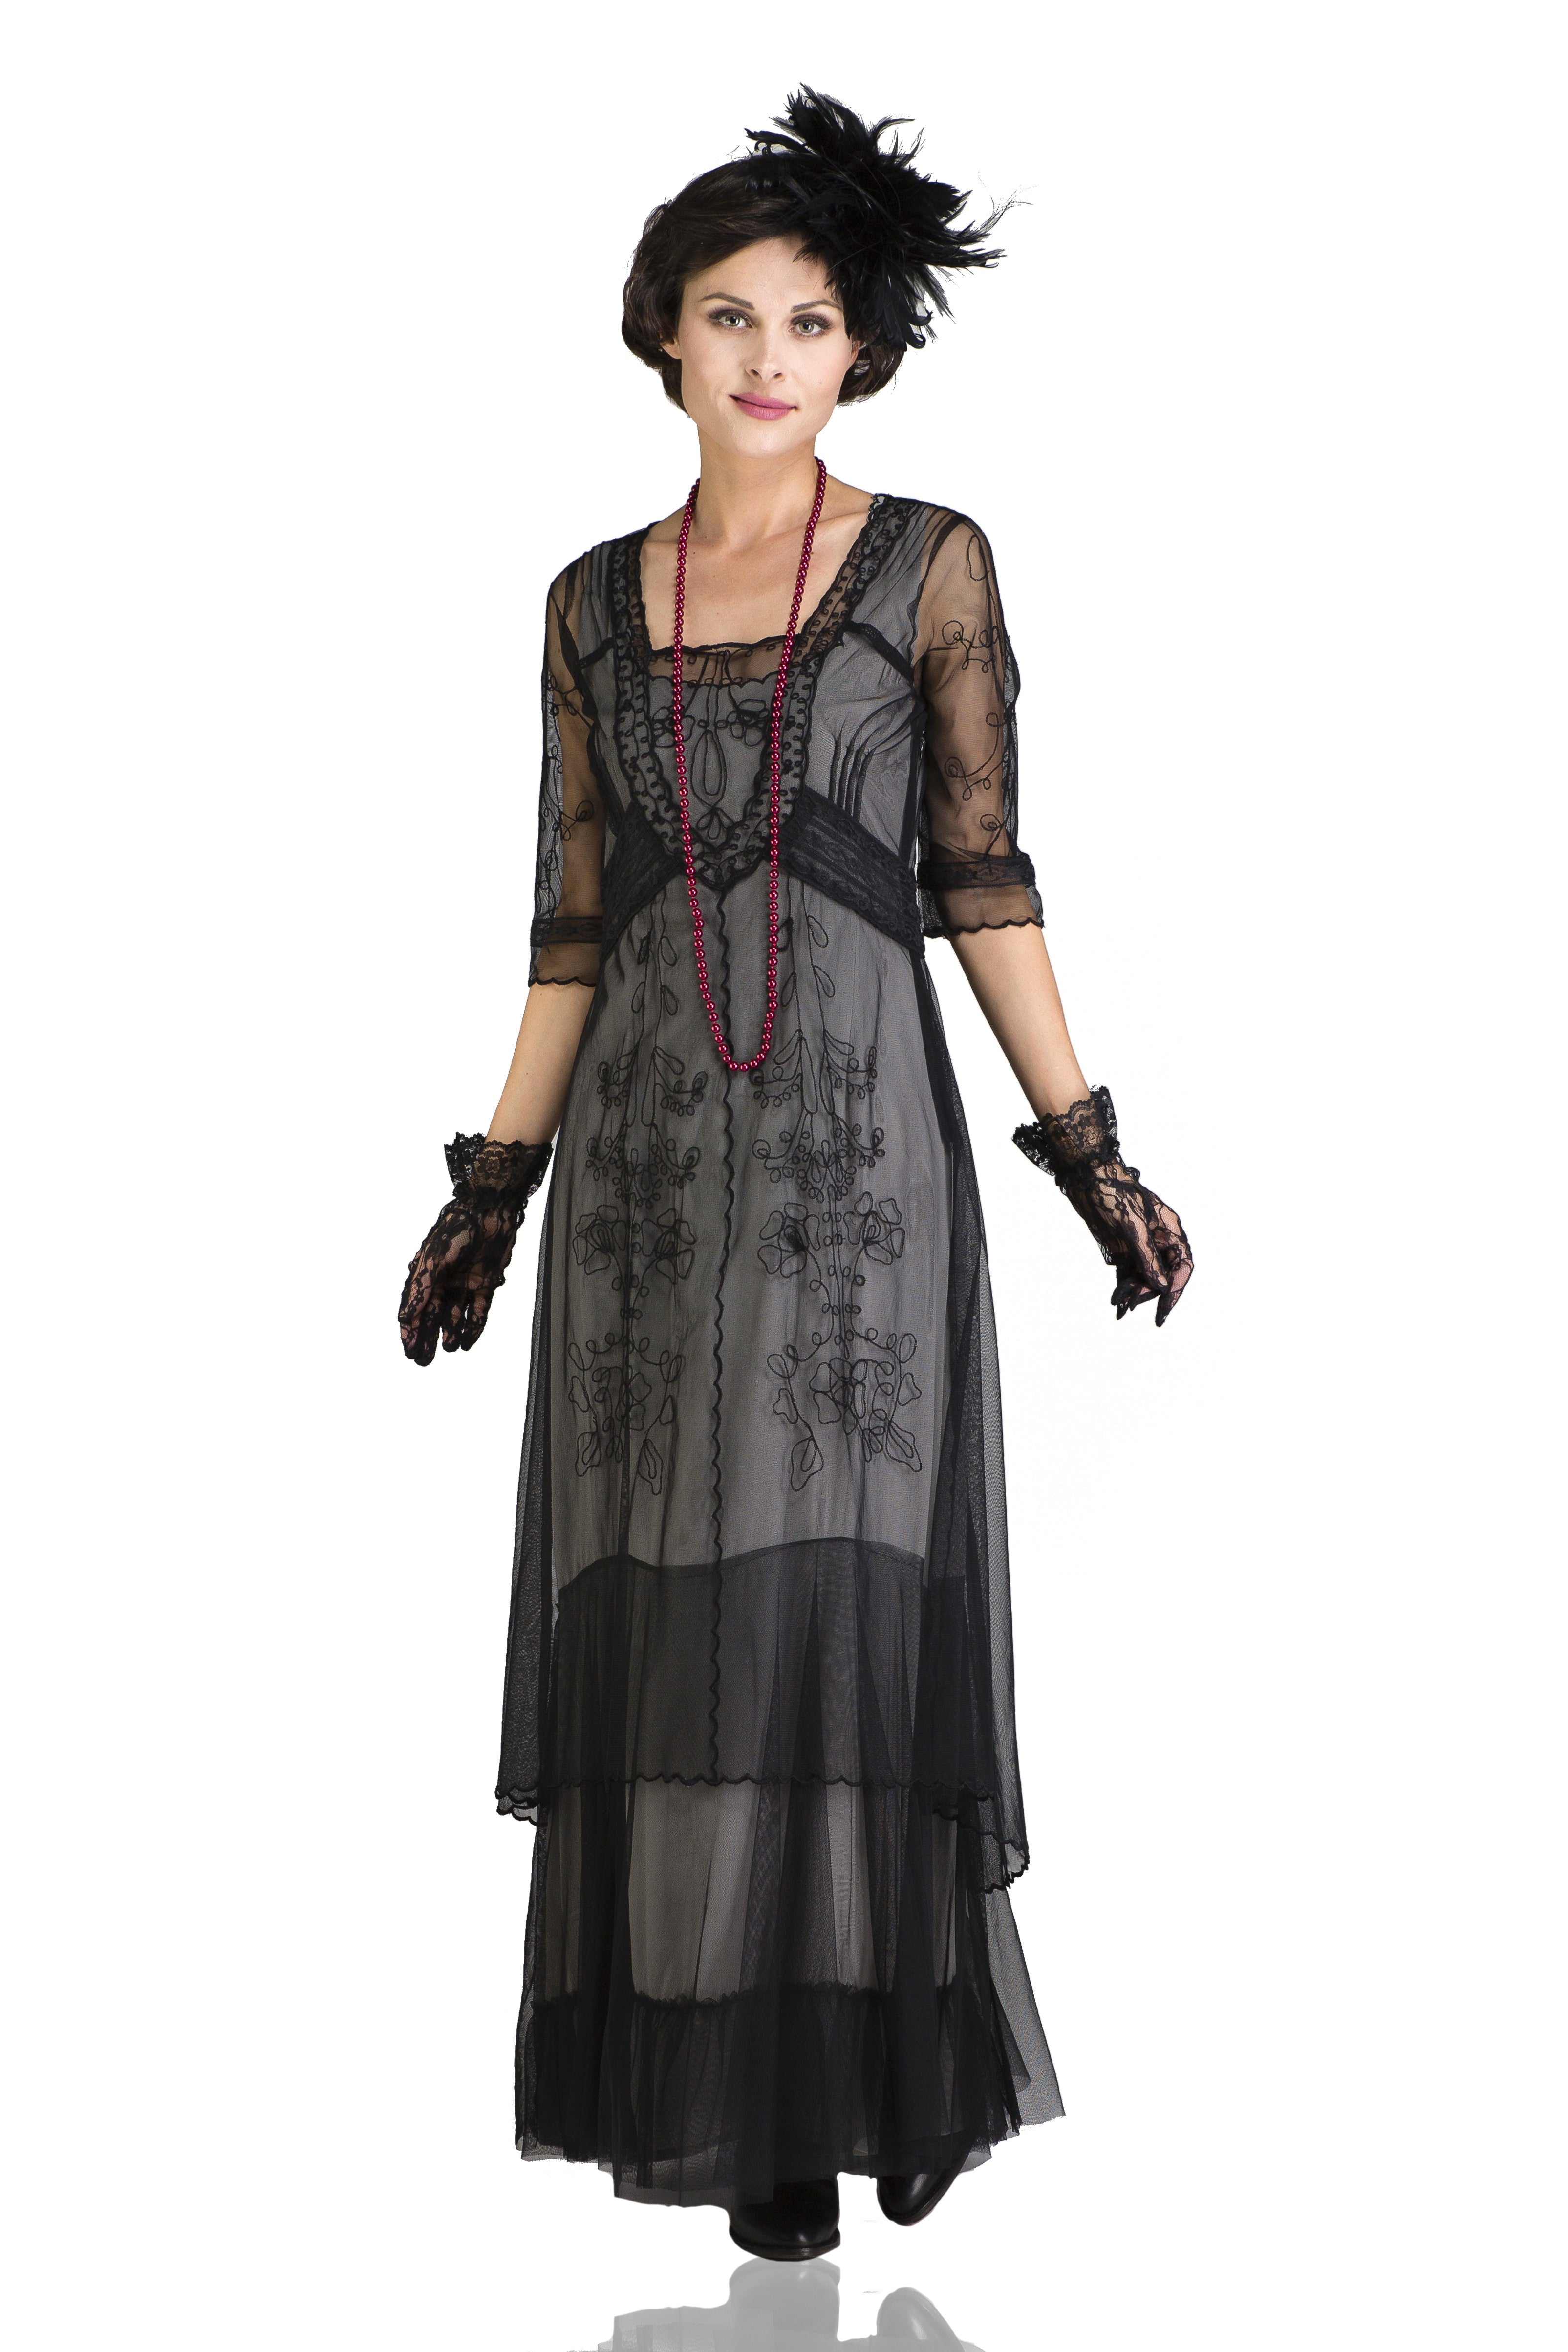 Victorian Clothing, Costumes & 1800s Fashion Victoria Vintage Style Party Gown in Black by Nataya $265.00 AT vintagedancer.com